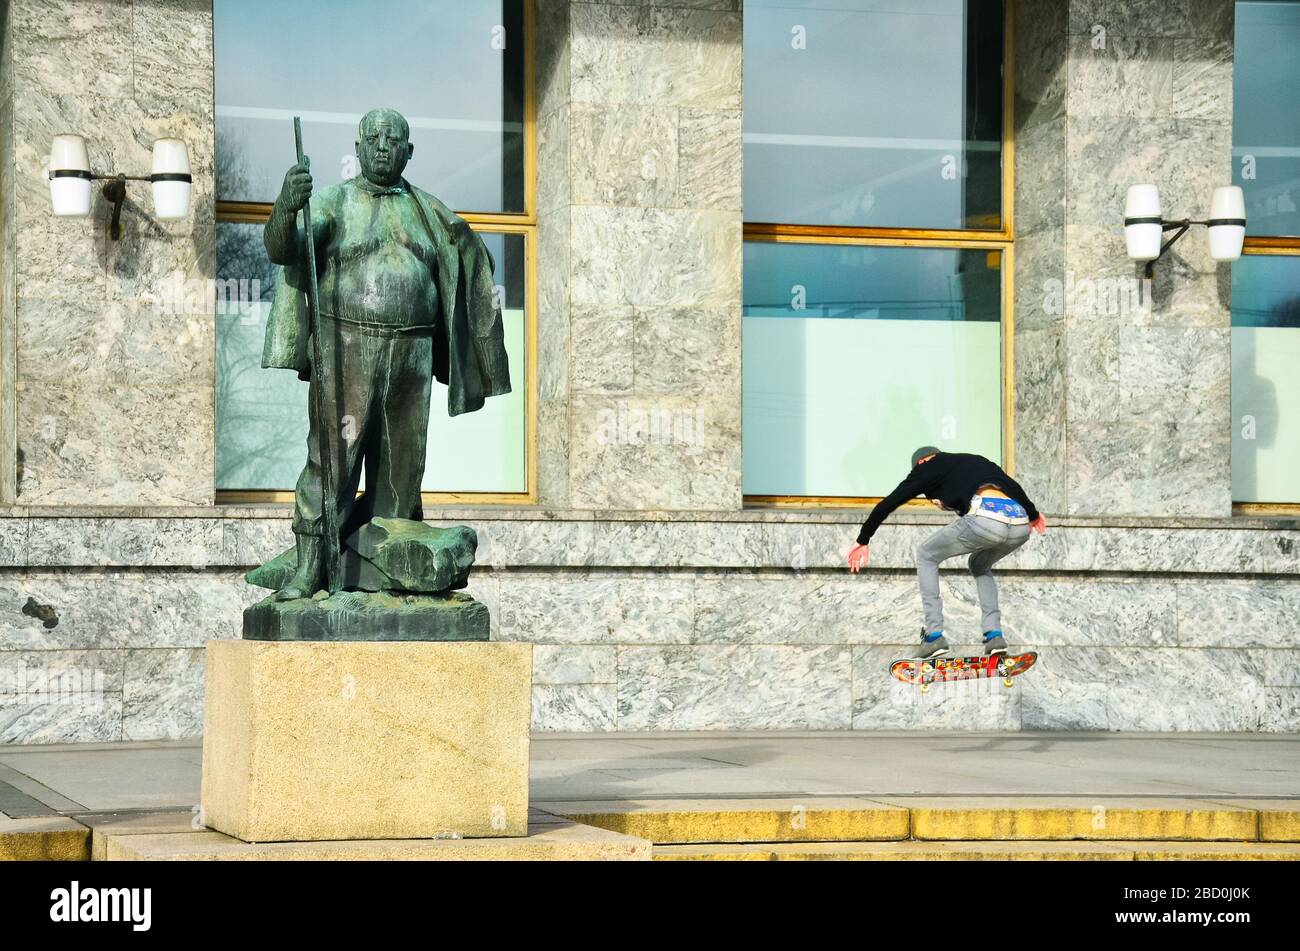 Young man jumping on skateboard in oslo near by statue of fat man Stock Photo